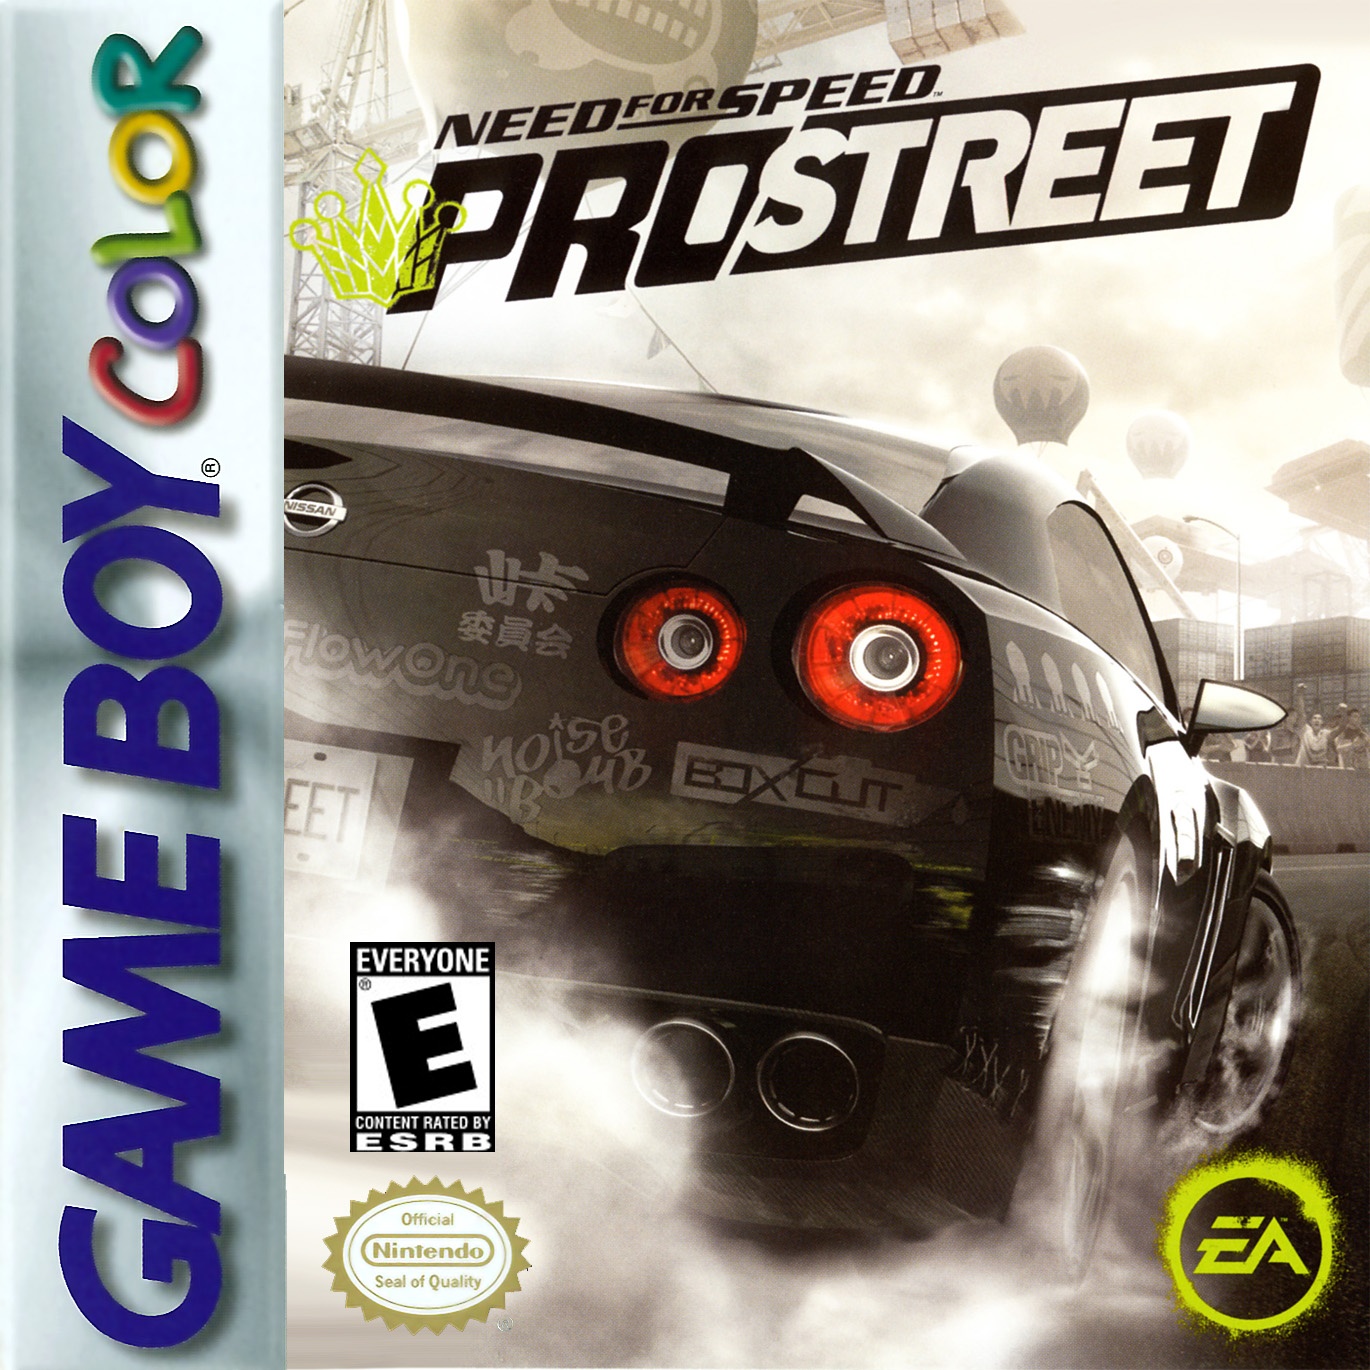 Need for Speed Pro Street box cover